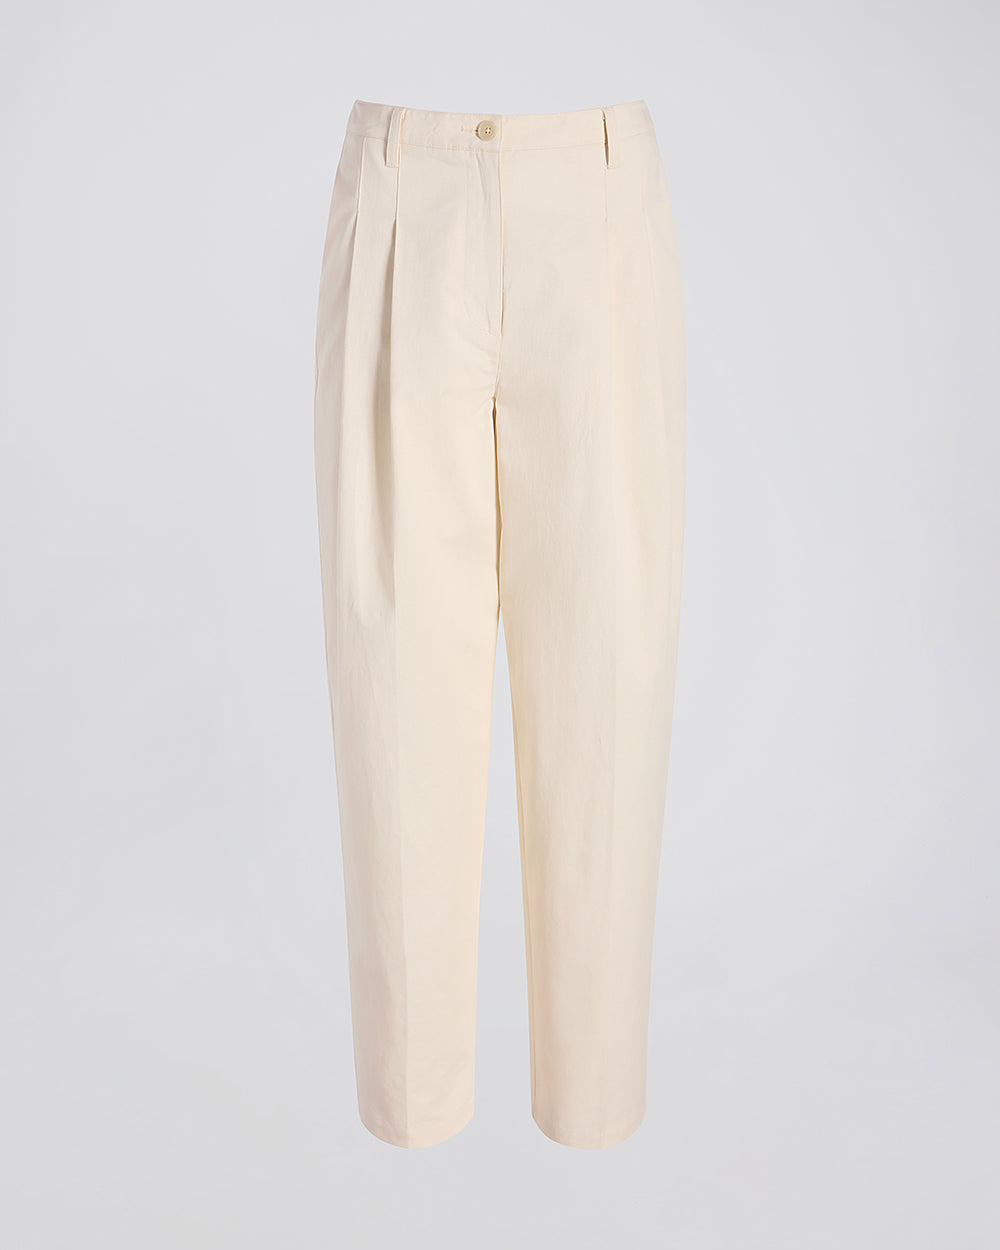 The Taline Pant - Solid & Striped